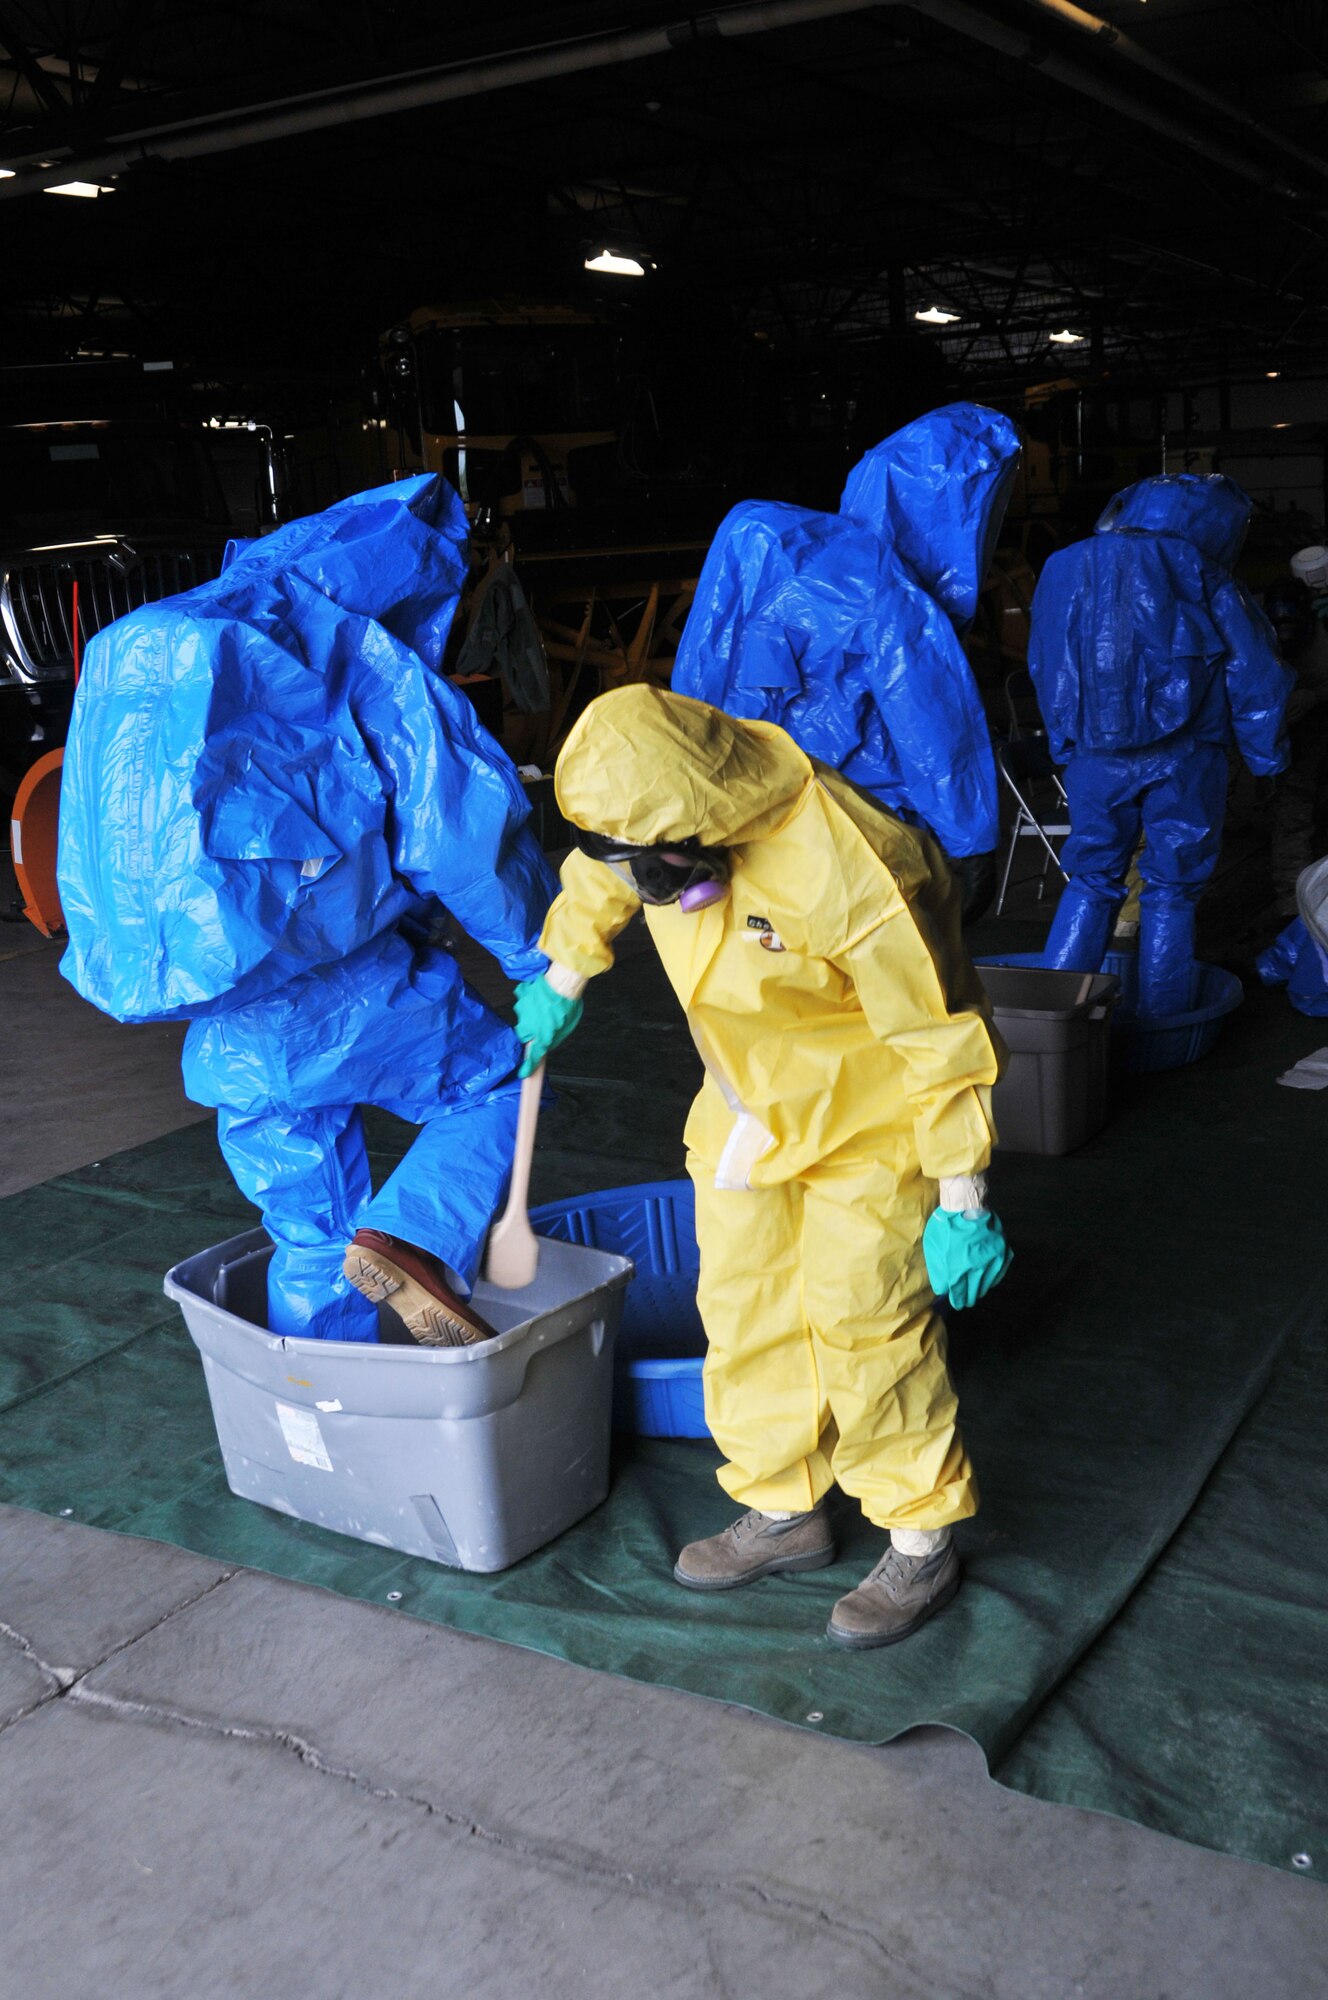 Staff Sgt. Shirley Woods decontaminates Tech. Sgt. Lee Dresch in the decontamination line during a Hazardous Waste Operations and Emergency Response (HAZWOPER) class at the 120th Airlift Wing in Great Falls Mont. May 20, 2016. The 120th AW offers an annual 40 hour course and an 8 hour refresher course annually. (U.S. Air National Guard photo/Senior Master Sgt. Eric Peterson)  